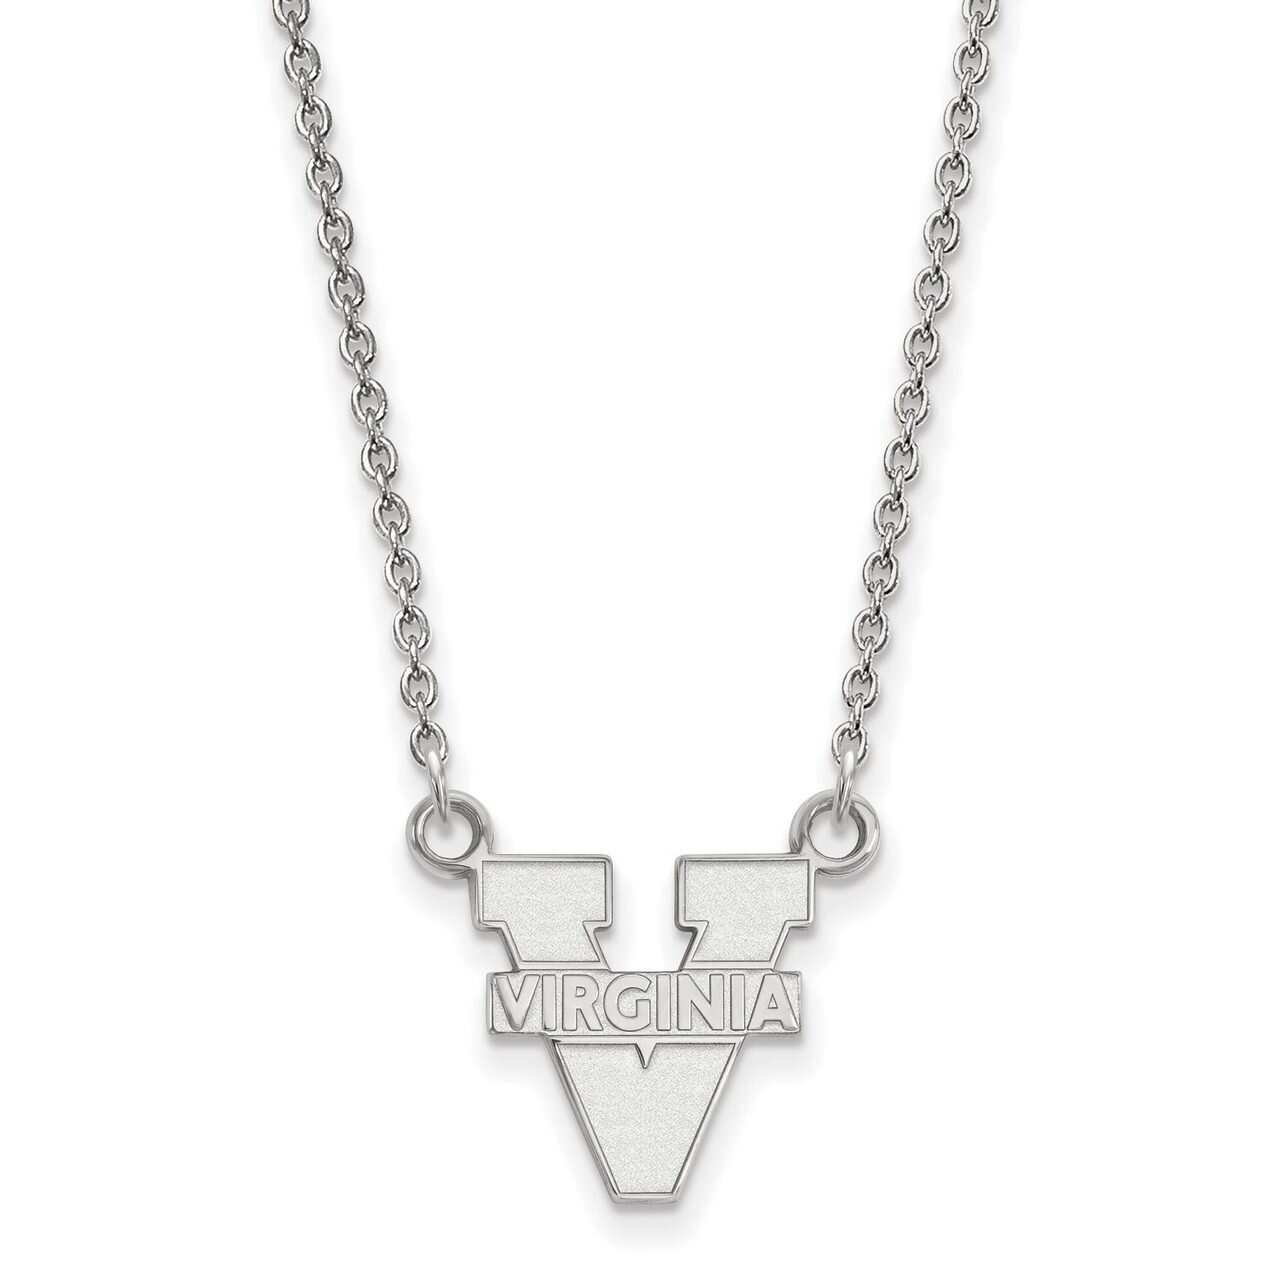 University of Virginia Small Pendant with Chain Necklace 14k White Gold 4W015UVA-18